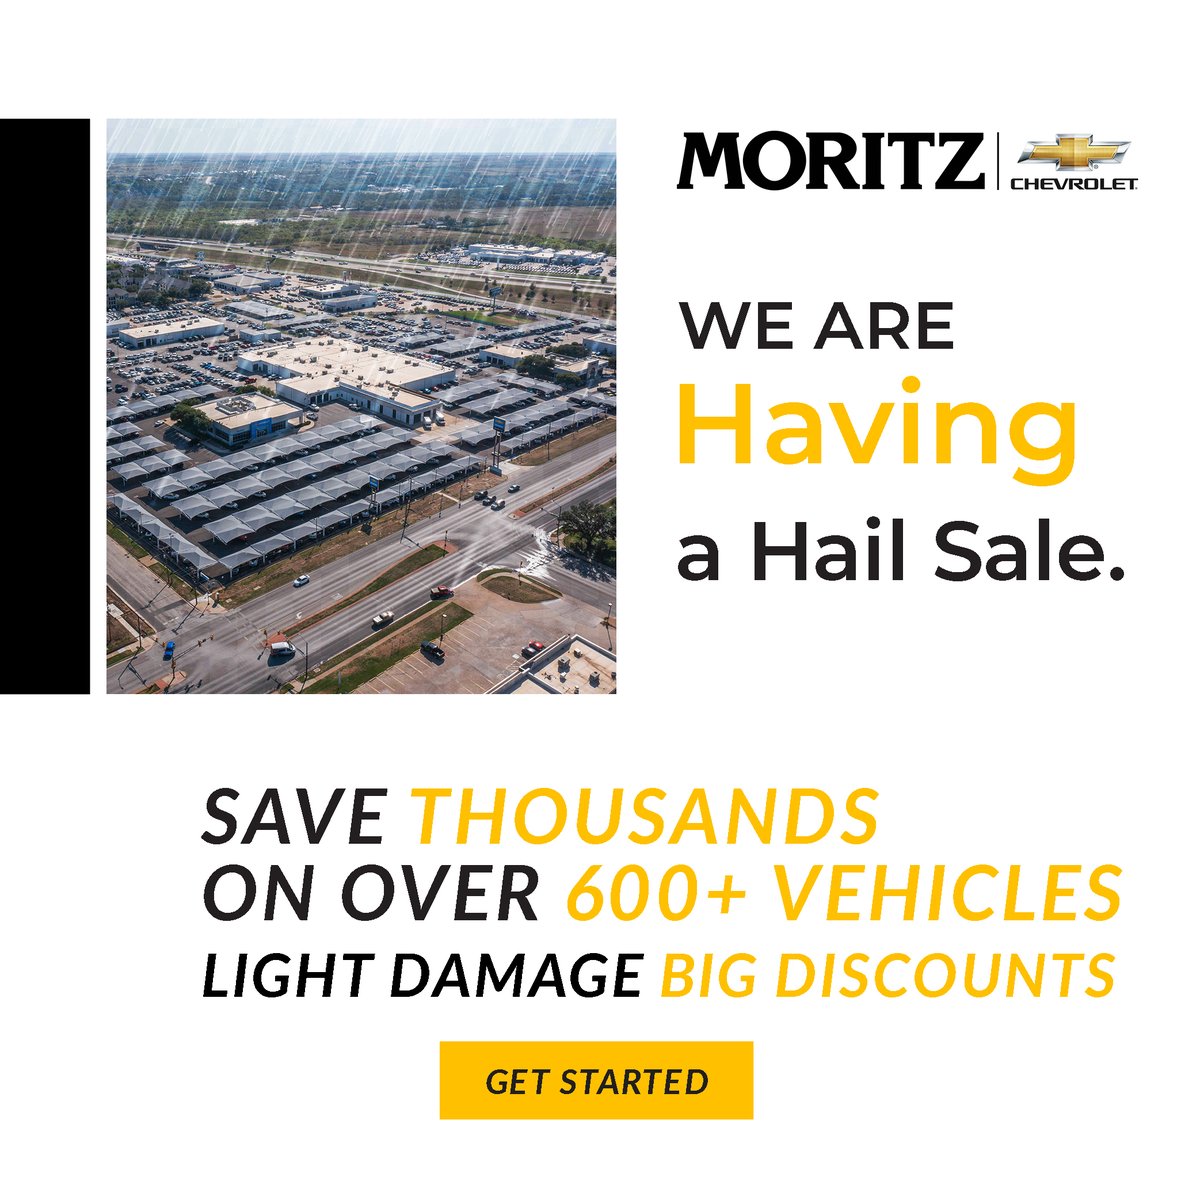 Save thousands now on over 600 vehicles at Moritz! Light Damage but BIG SAVINGS!
Drive up and see our team today at 9101 Camp Bowie West Blvd., Fort Worth, TX or reach out to us online at MoritzChevrolet.com.
#moritz #Chevrolet #Fortworth #hailsale #lightdamage #BigSavings